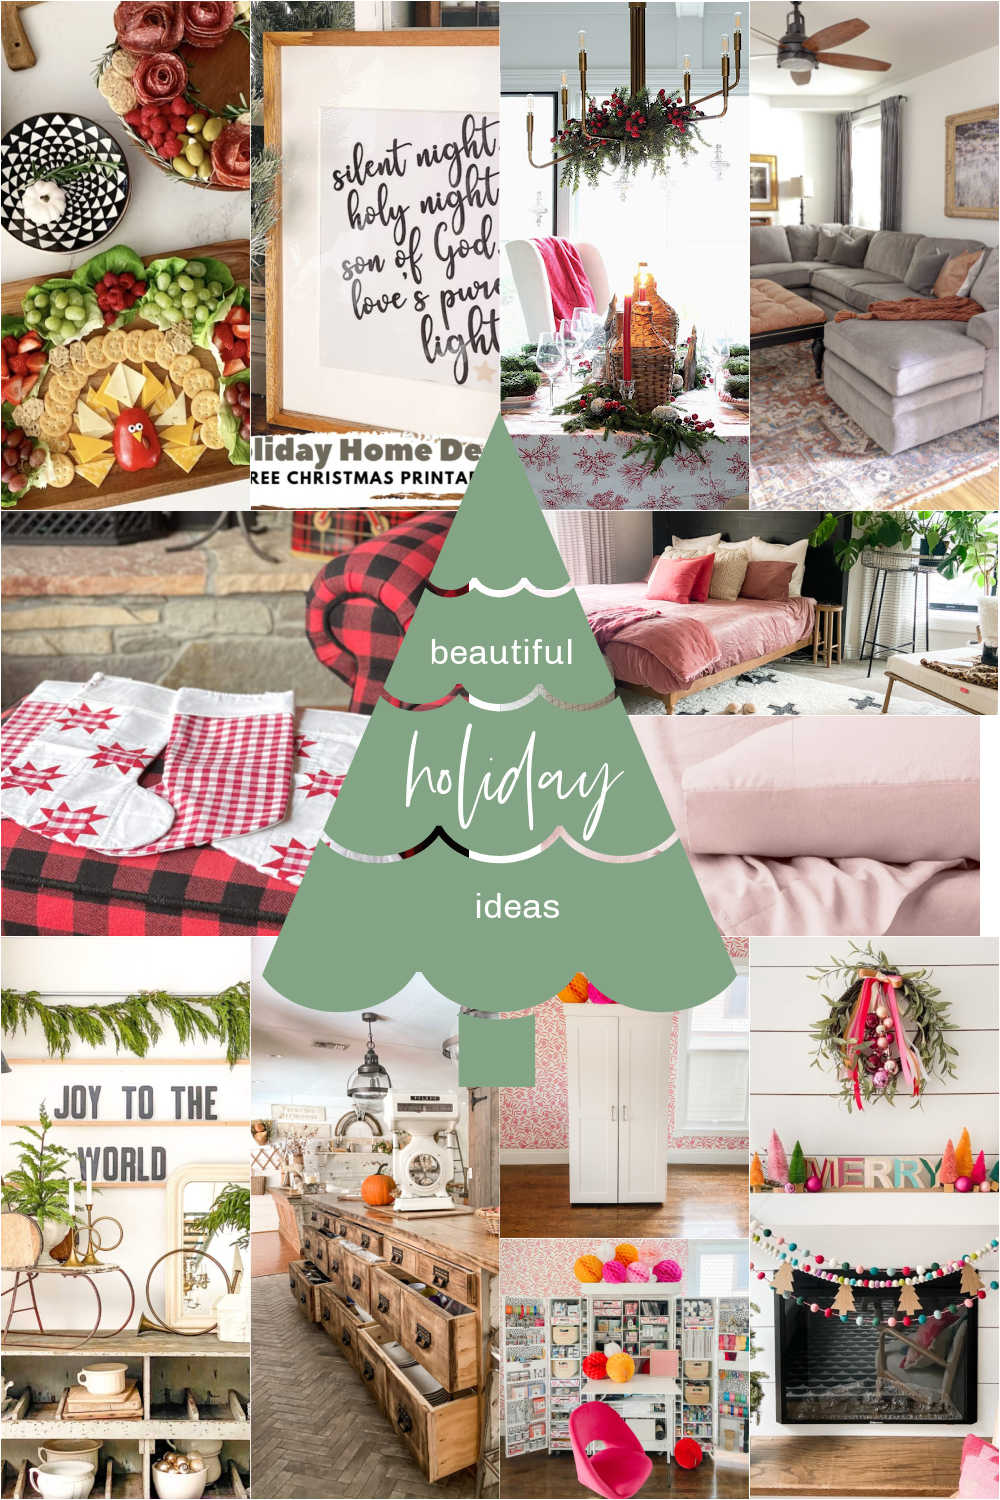 Welcome Home Saturday - Beautiful Holiday Ideas. Grab a cup of cocoa and join me as I share some easy and festive holiday and home DIY ideas!